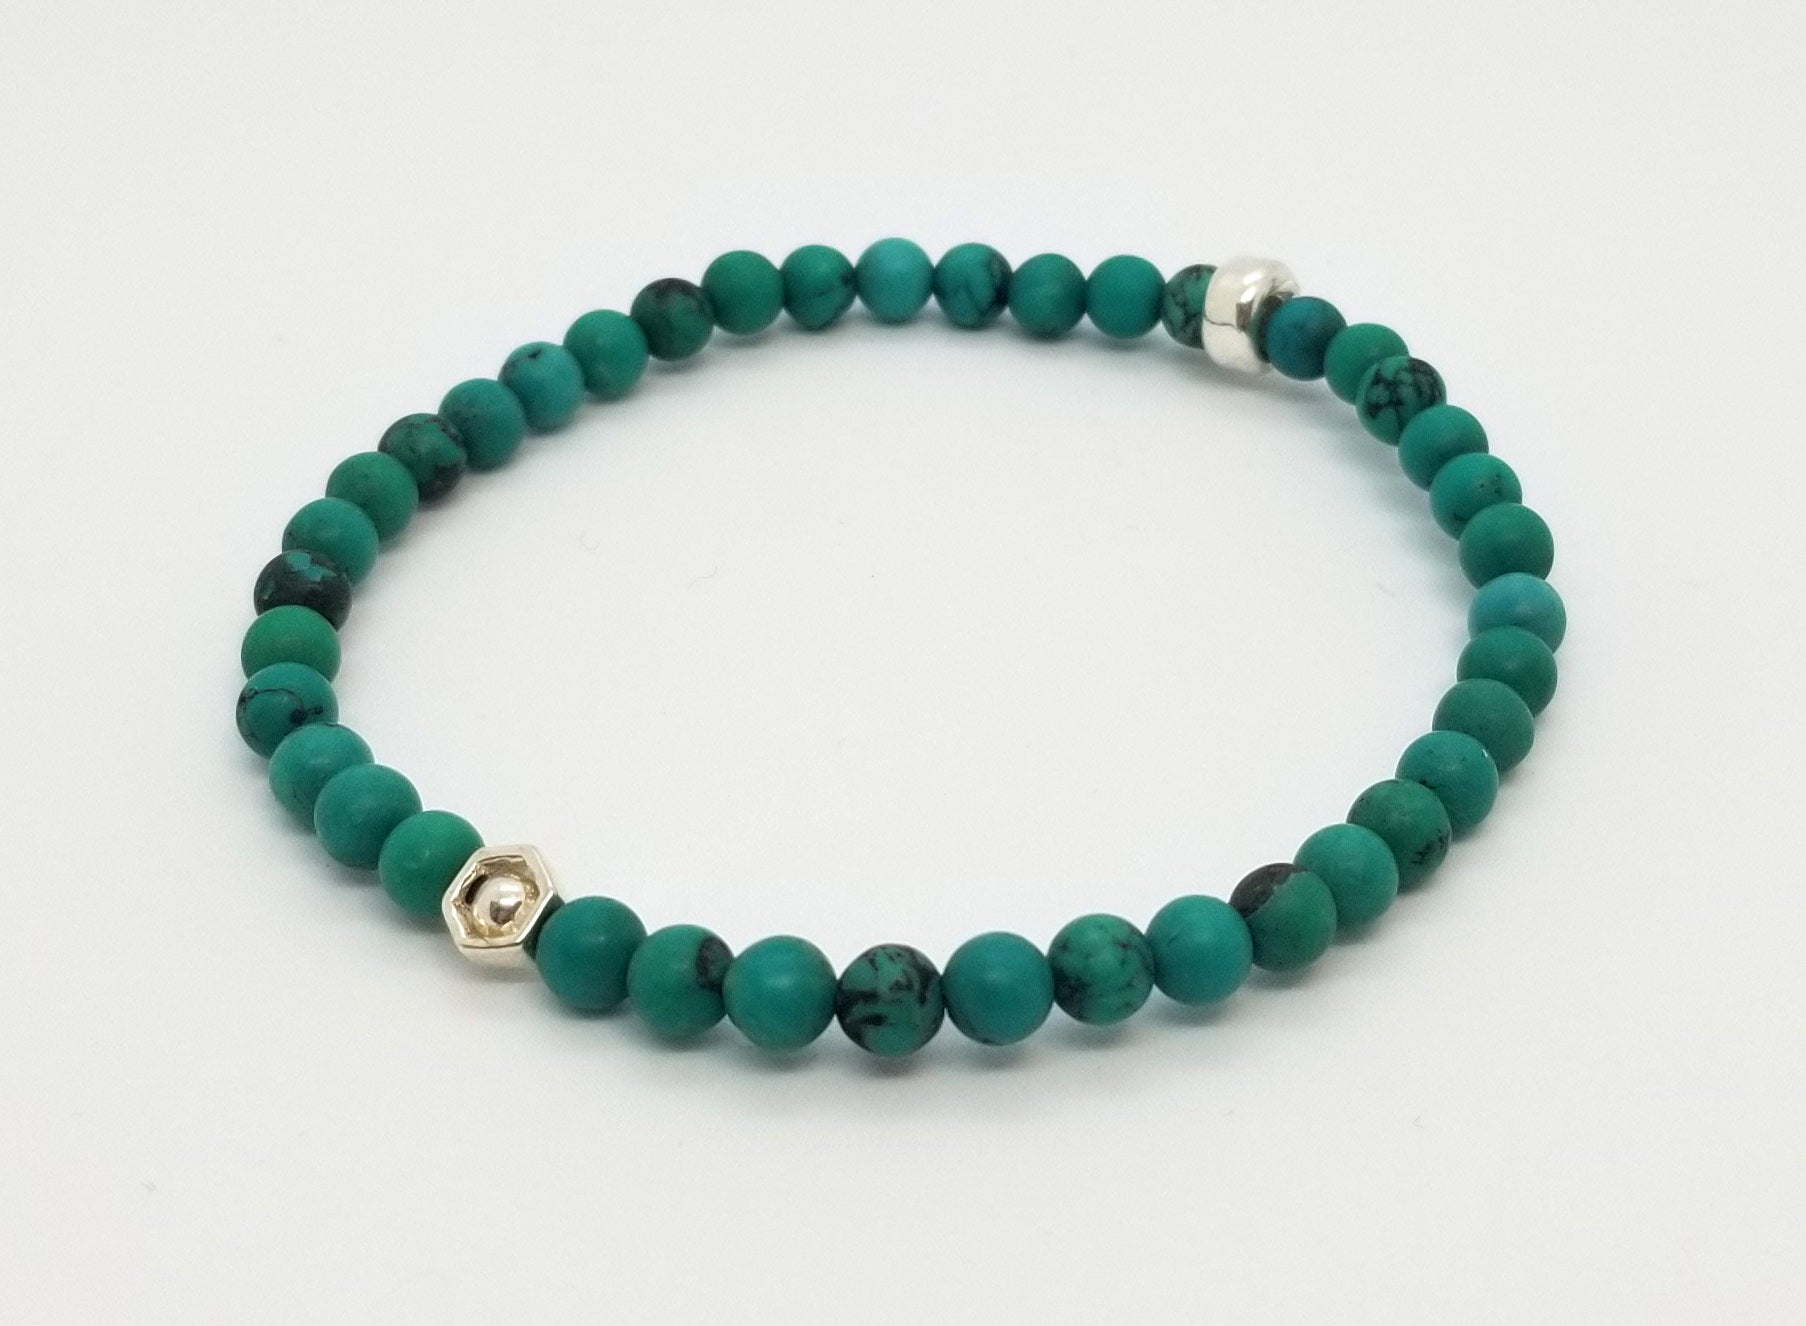 4mm Tibetan Turquoise Silver Hexagon Bracelet- Sold Out